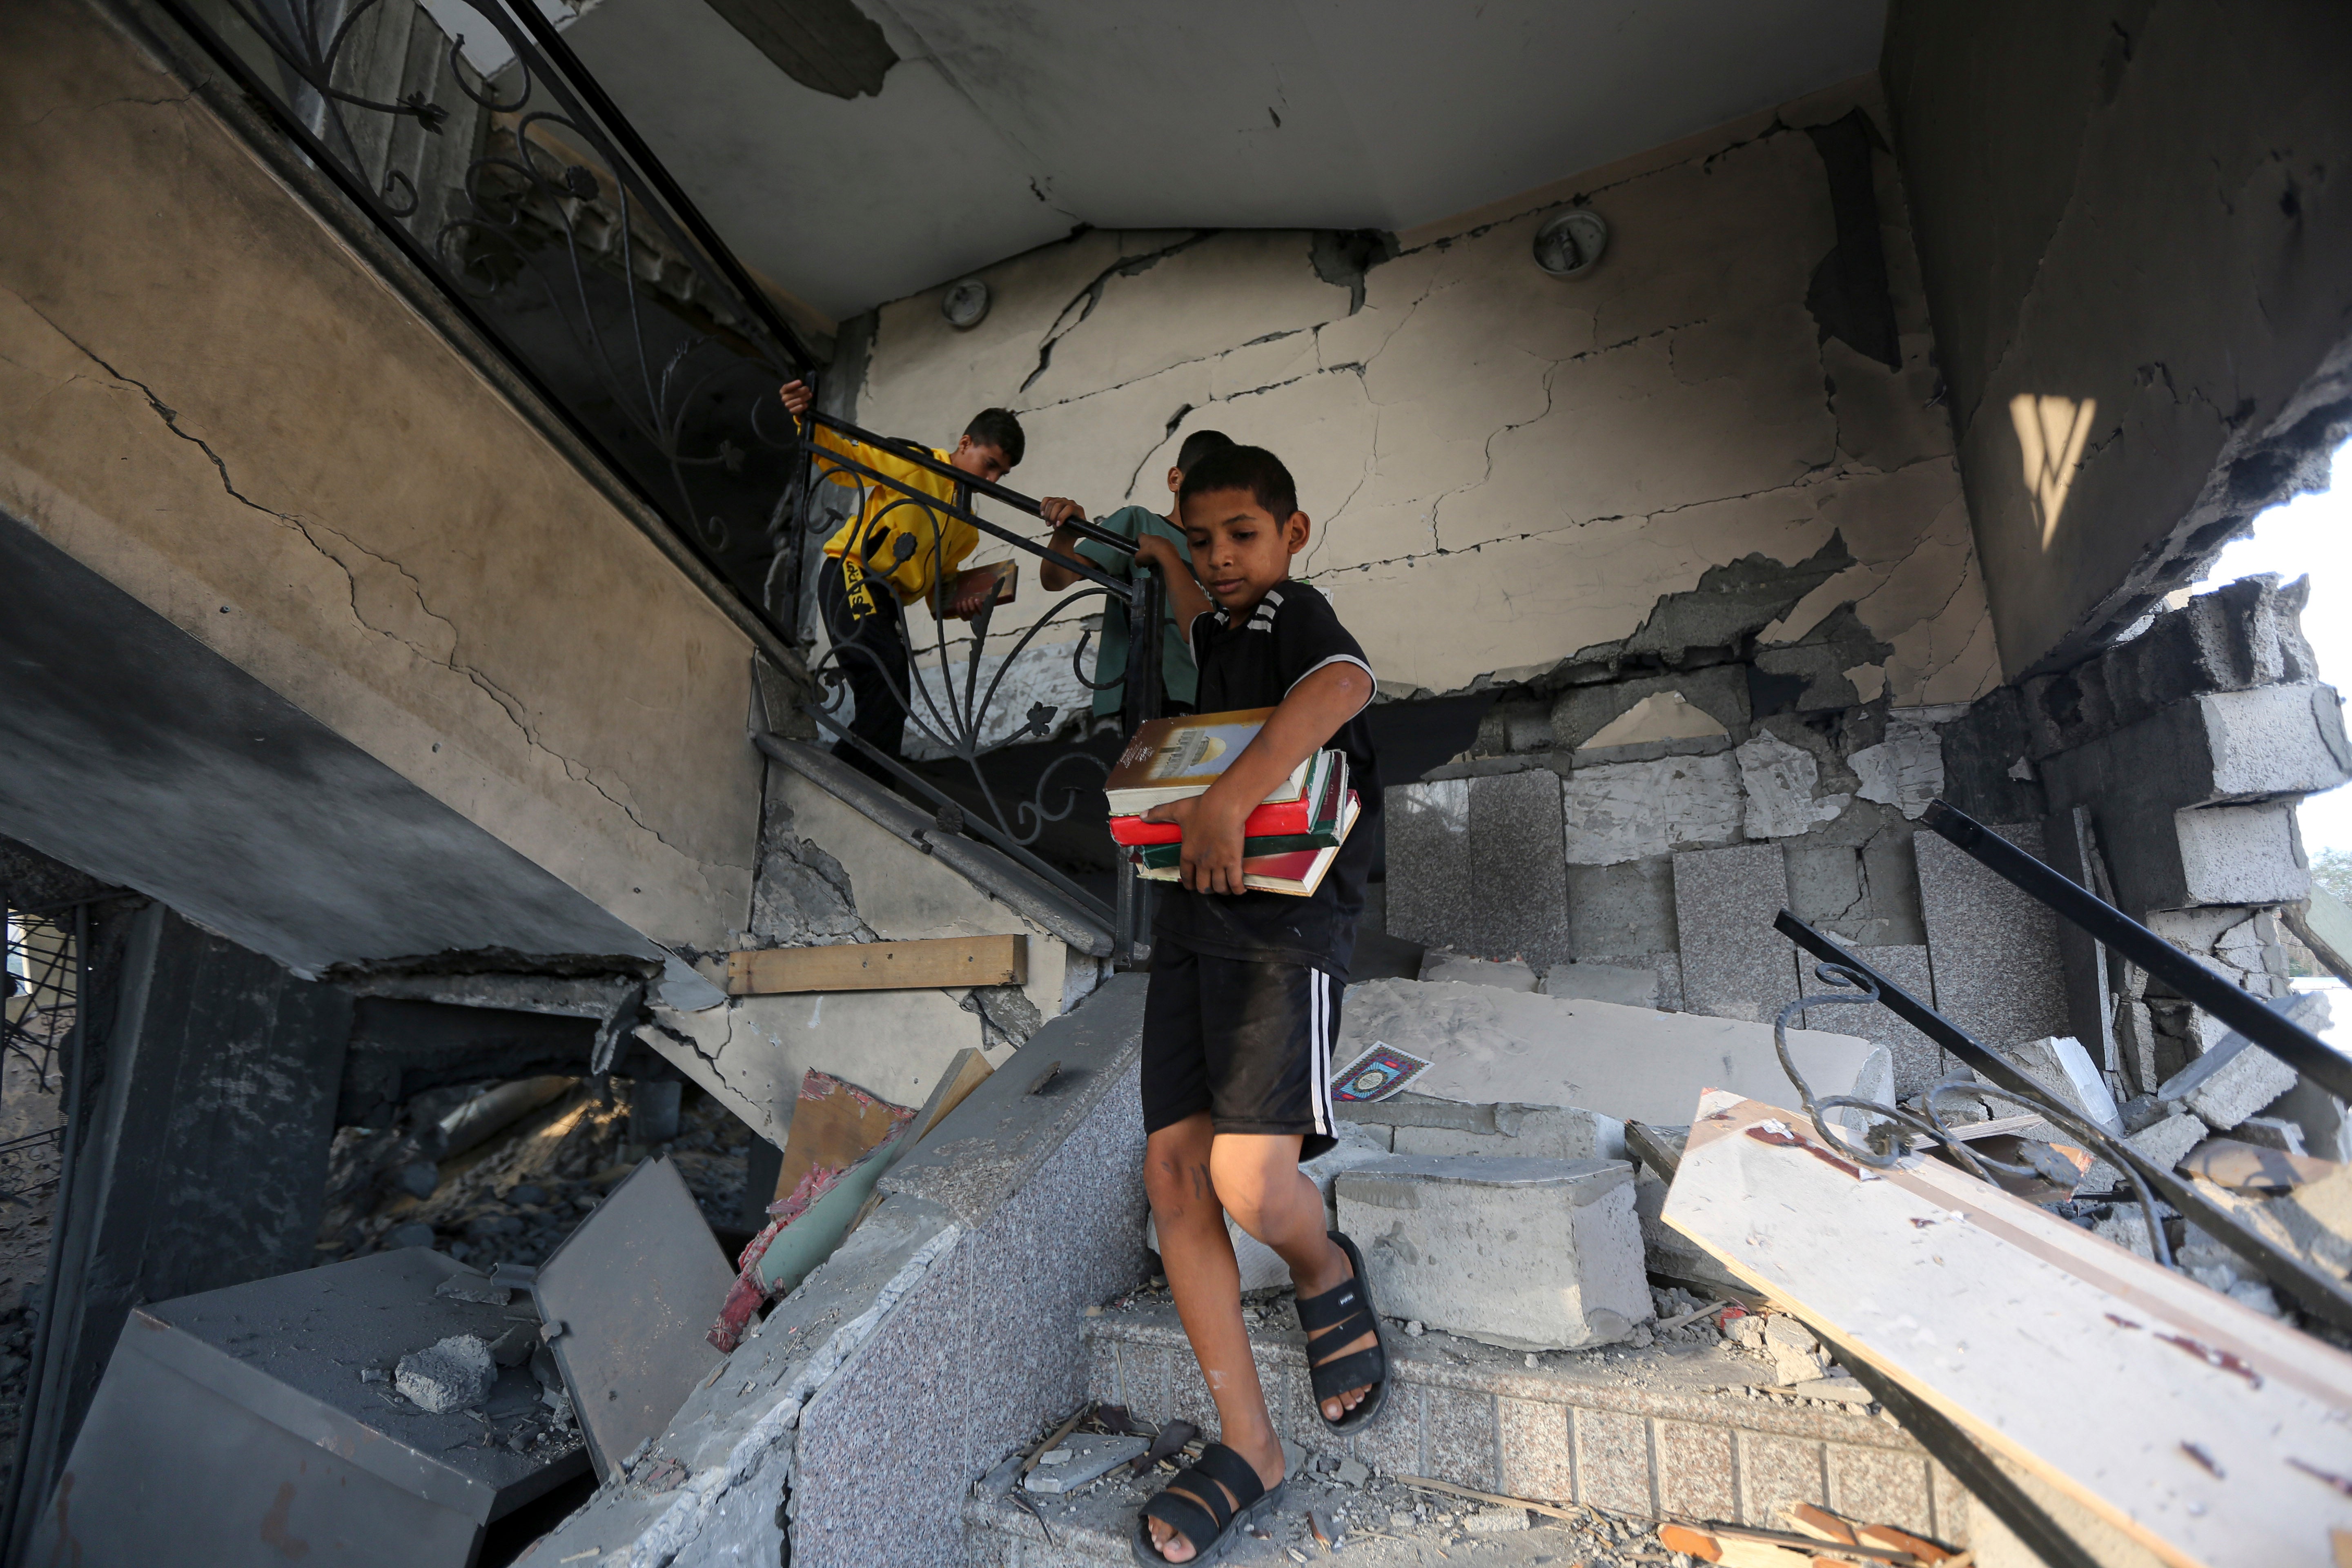 Last year Save the Children reported that 80 per cent of Gazan children suffer from depression